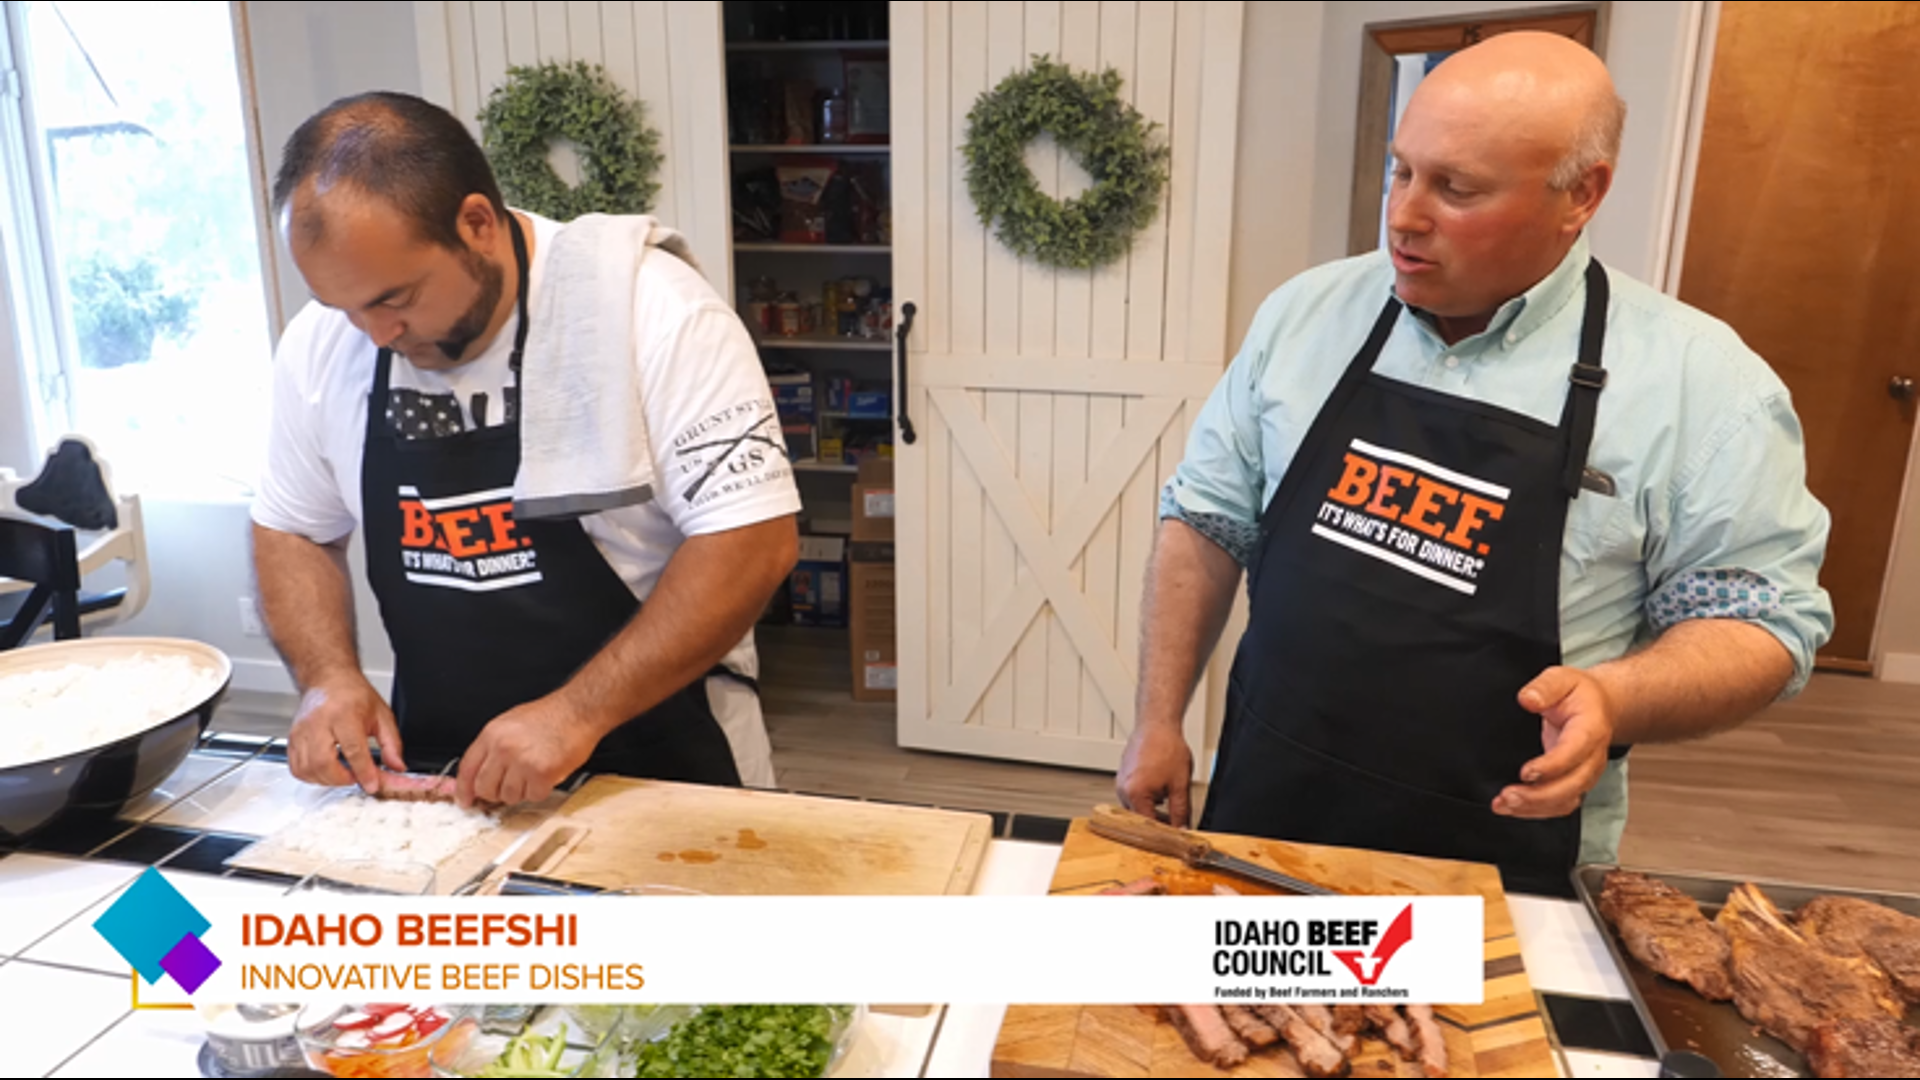 The latest beefy trend is Beefshi, otherwise known as beef sushi. One local multi-generational Idaho ranch family is rolling out this new dish! Recipes at IDBEEF.ORG